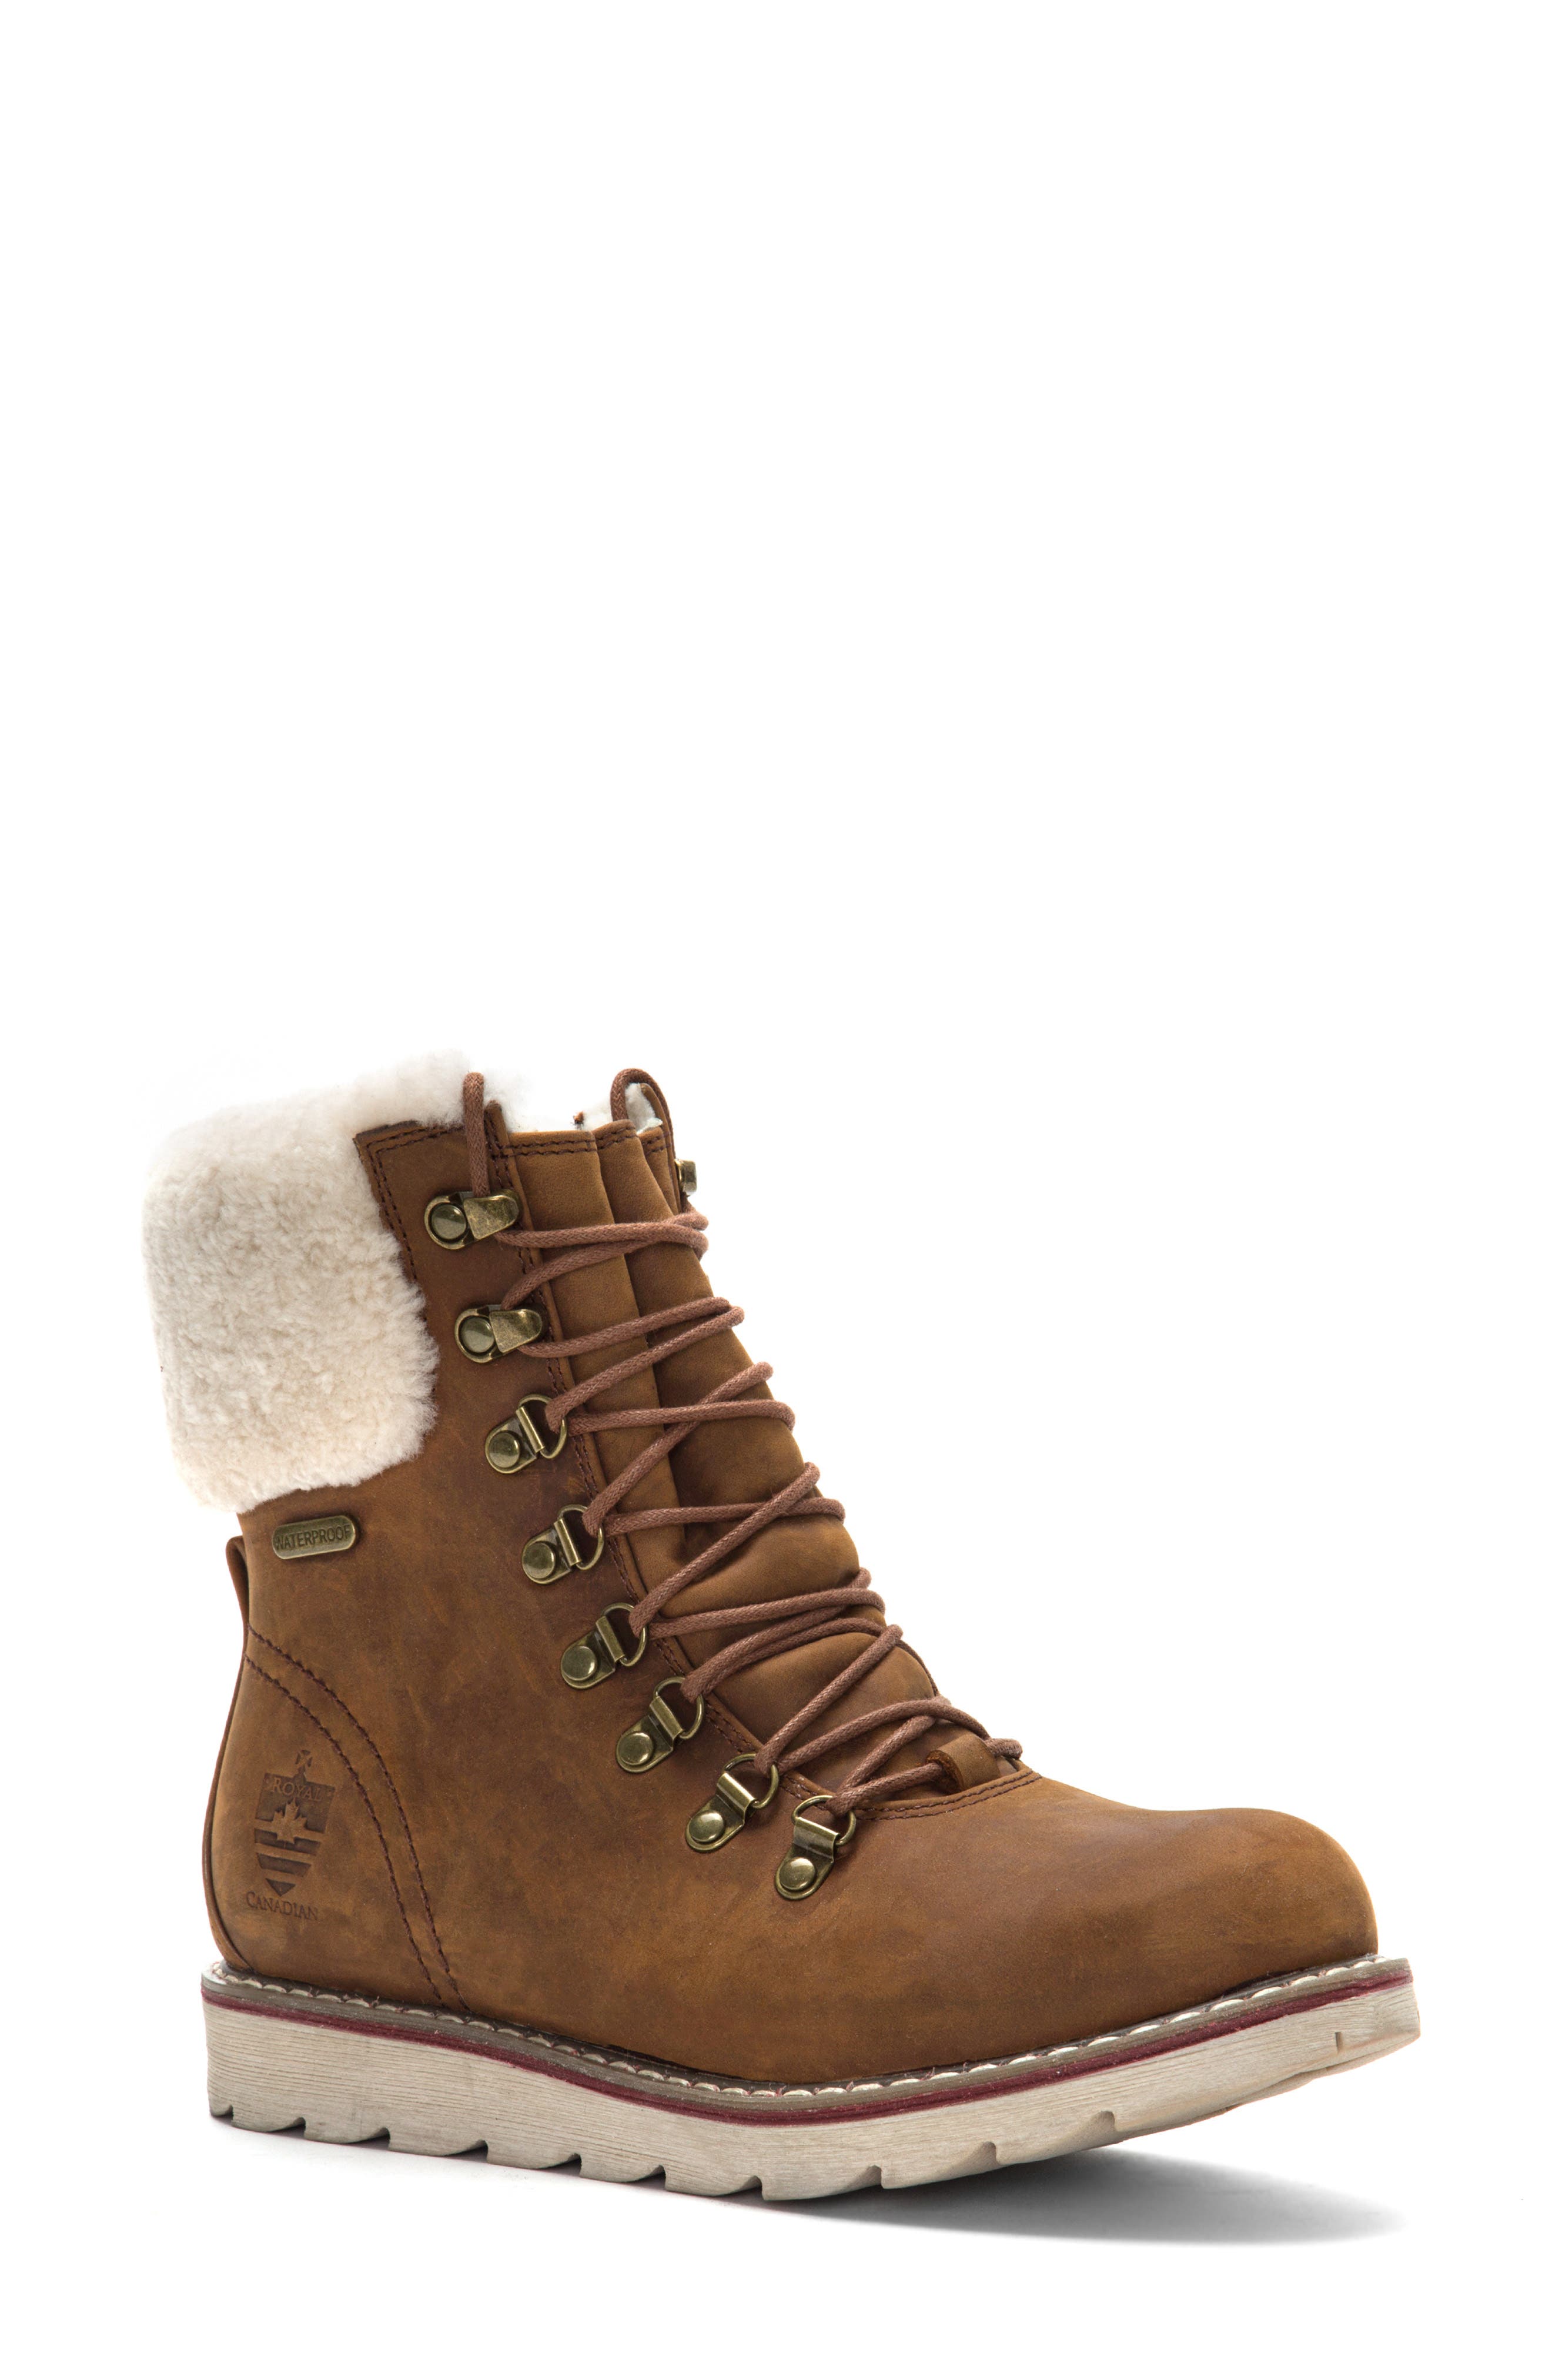 royal canadian boots women